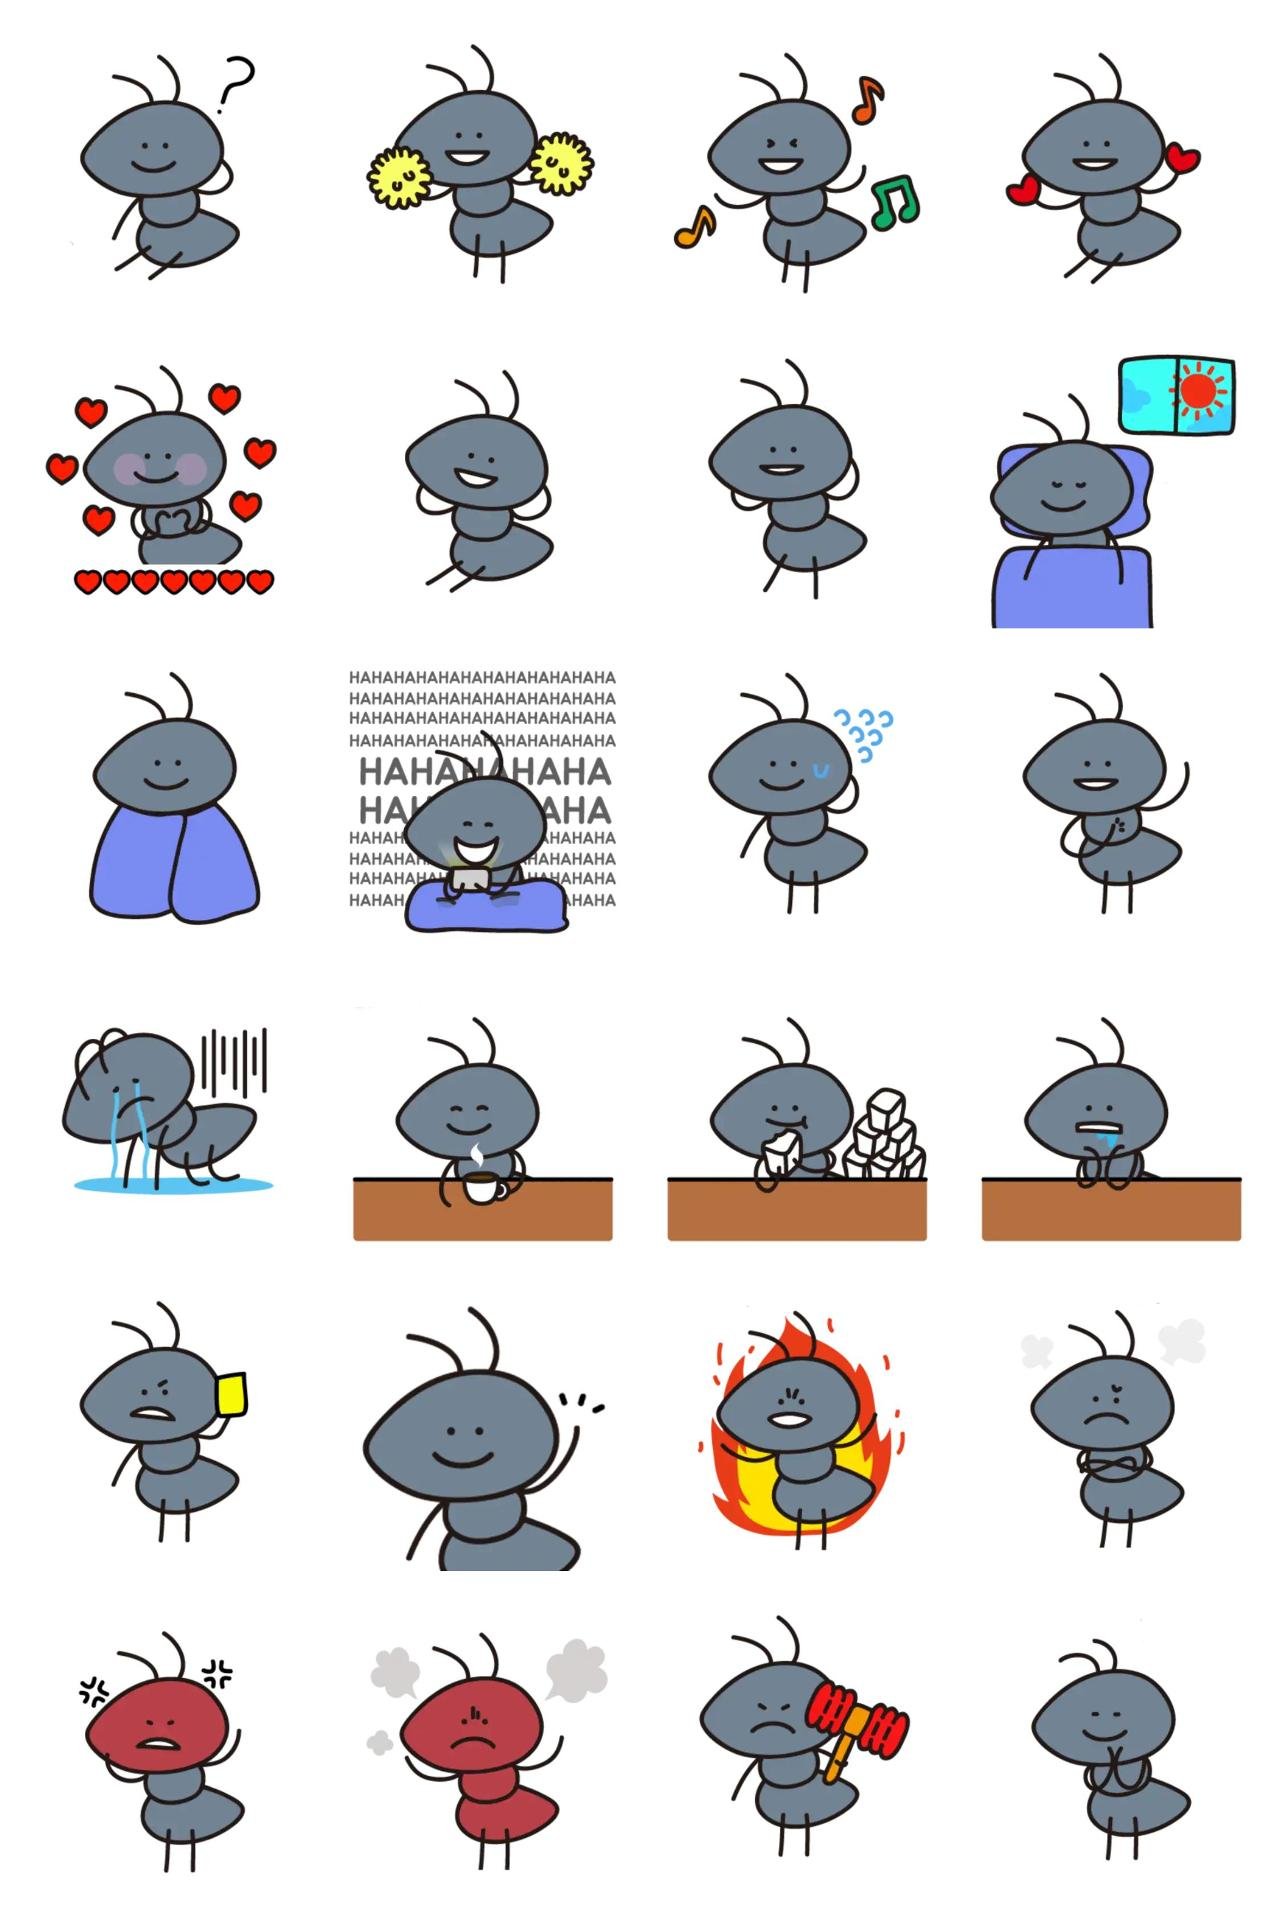 Working ant at rest Animation/Cartoon sticker pack for Whatsapp, Telegram, Signal, and others chatting and message apps